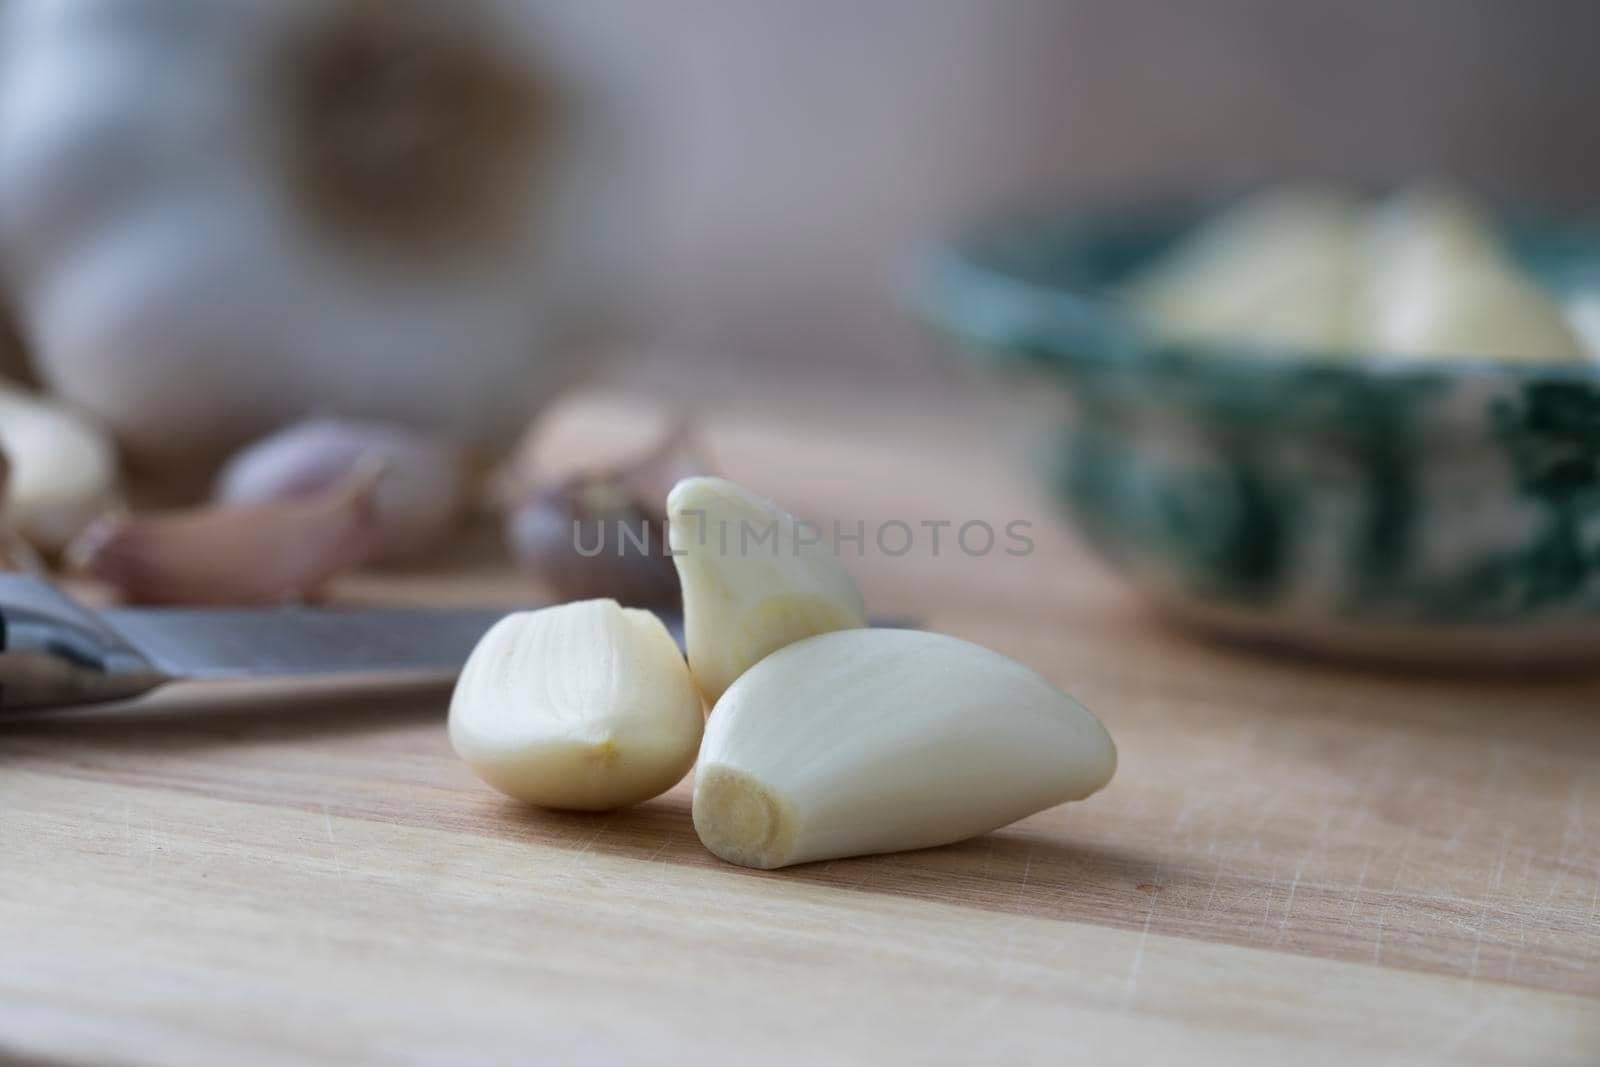 Peeled garlic cloves on wooden cutting board with knife and bowl in background.